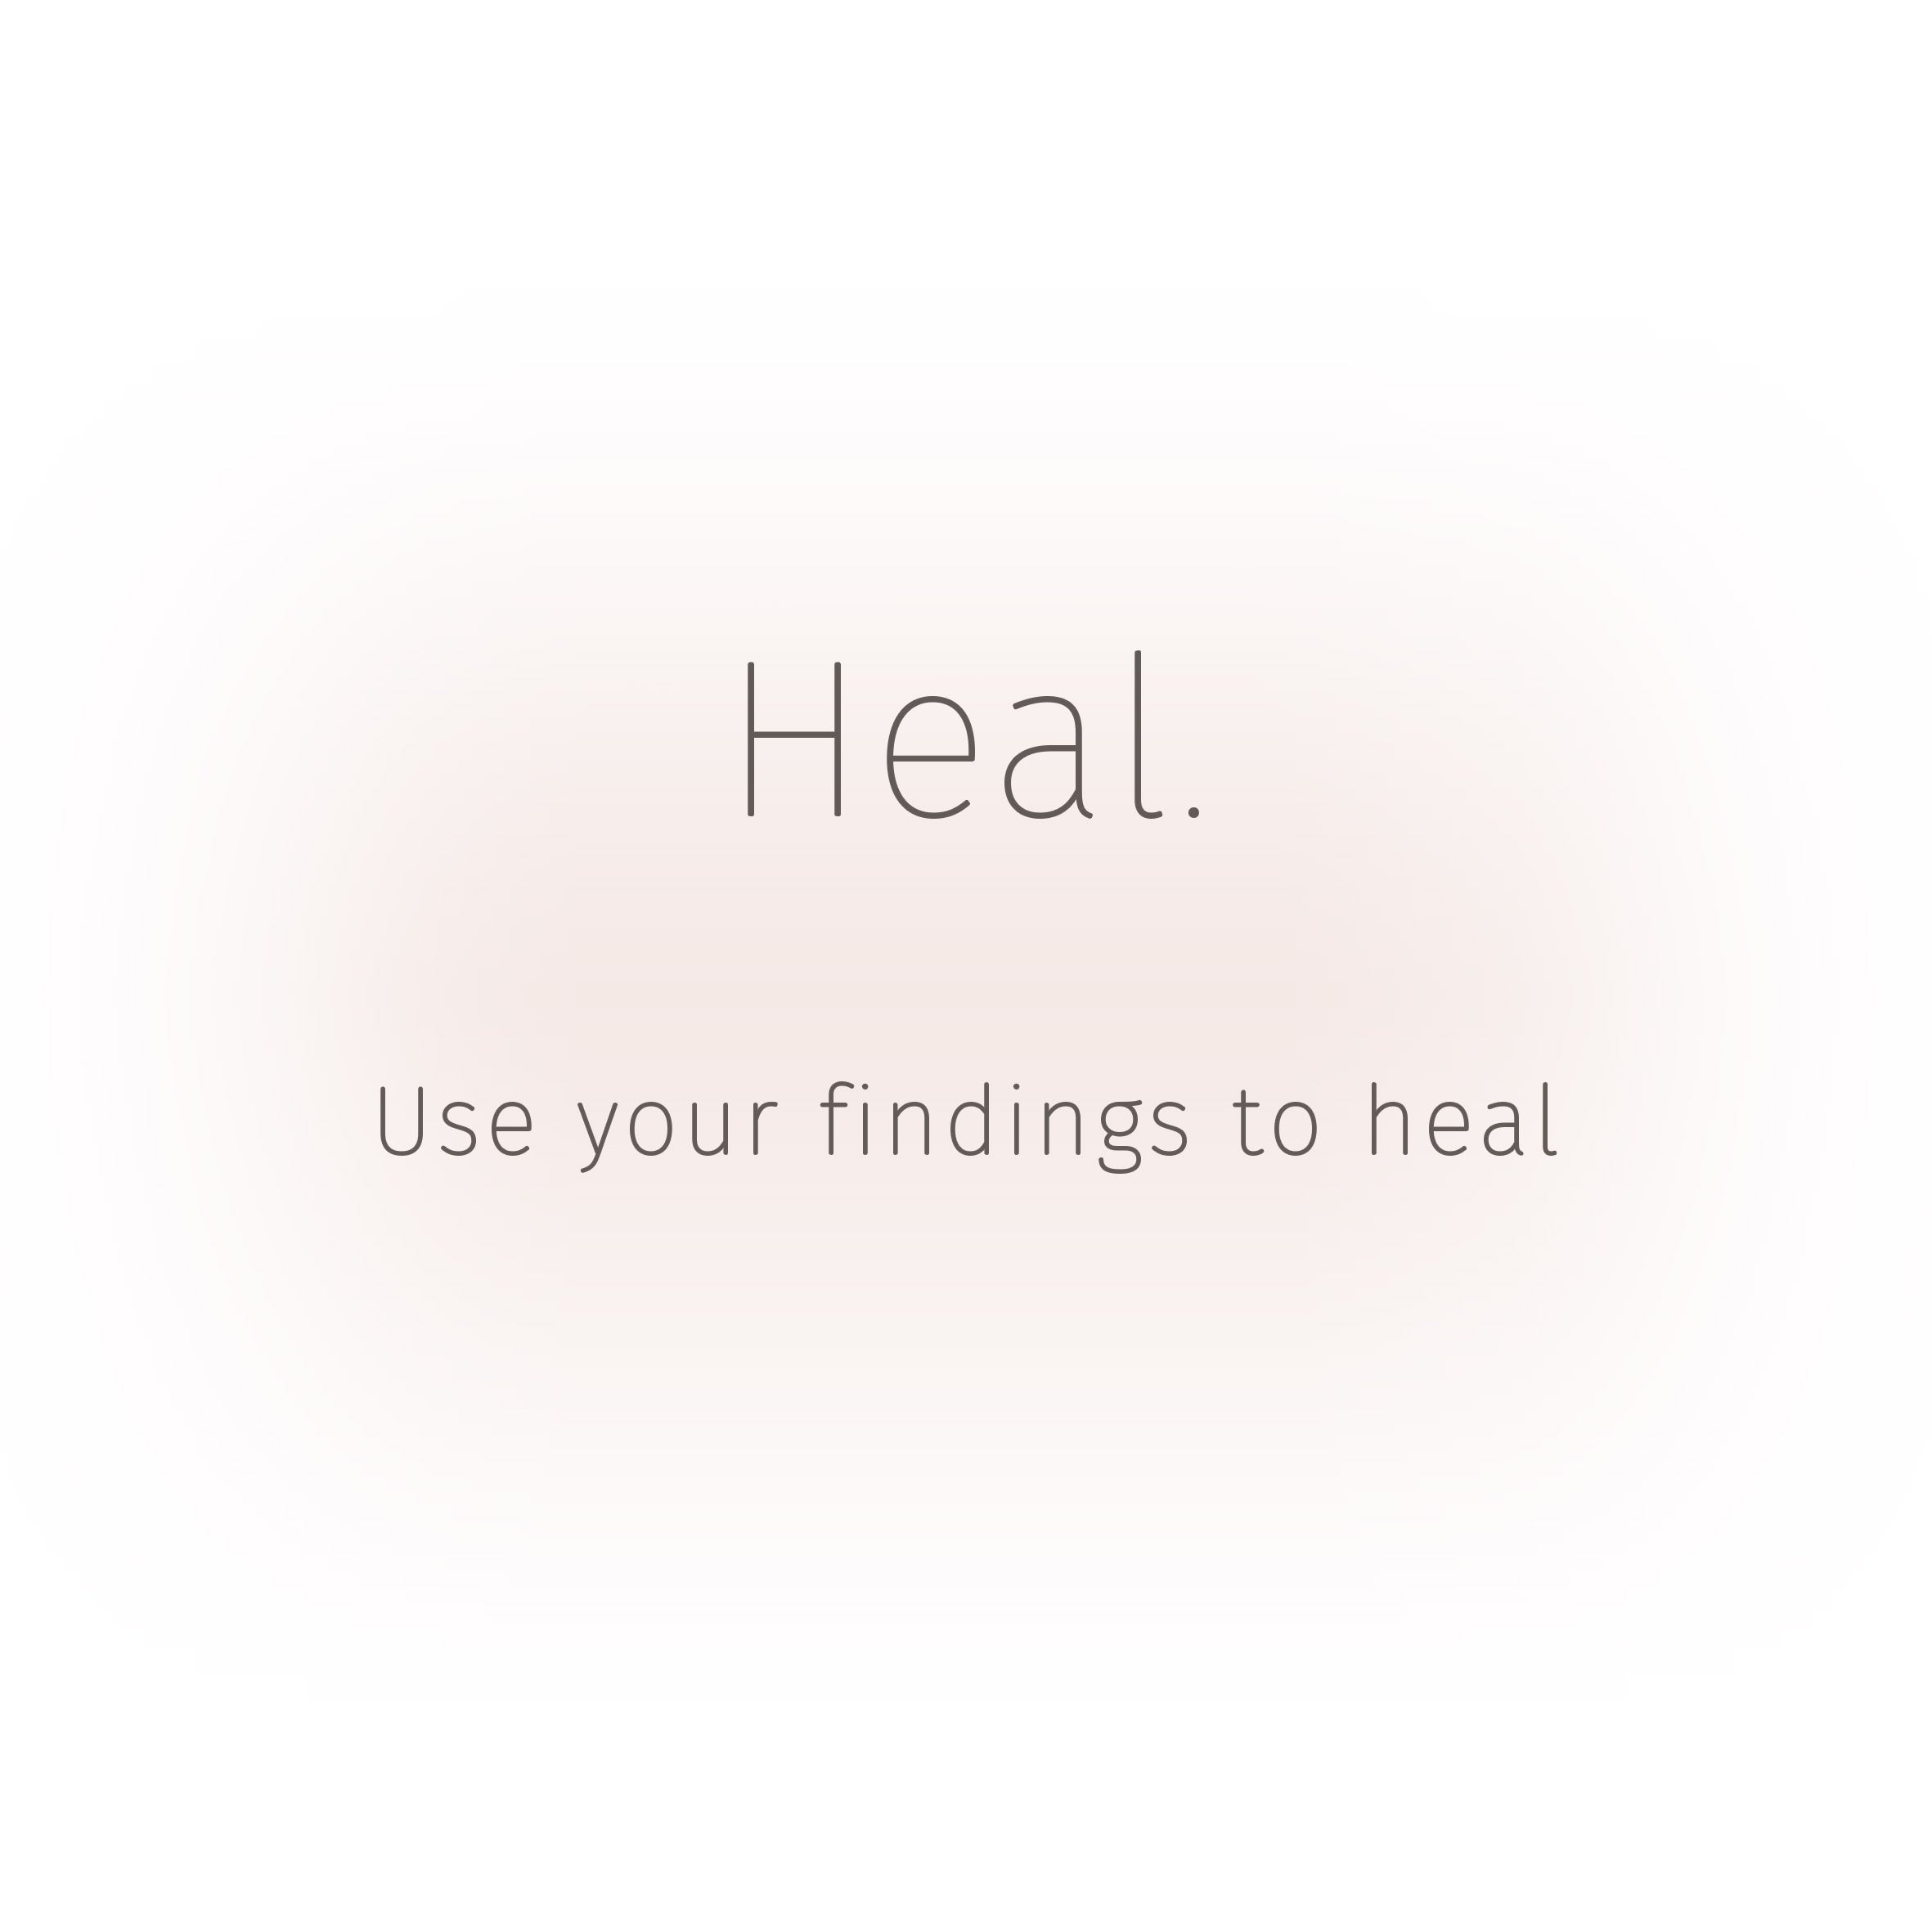 heal-quote